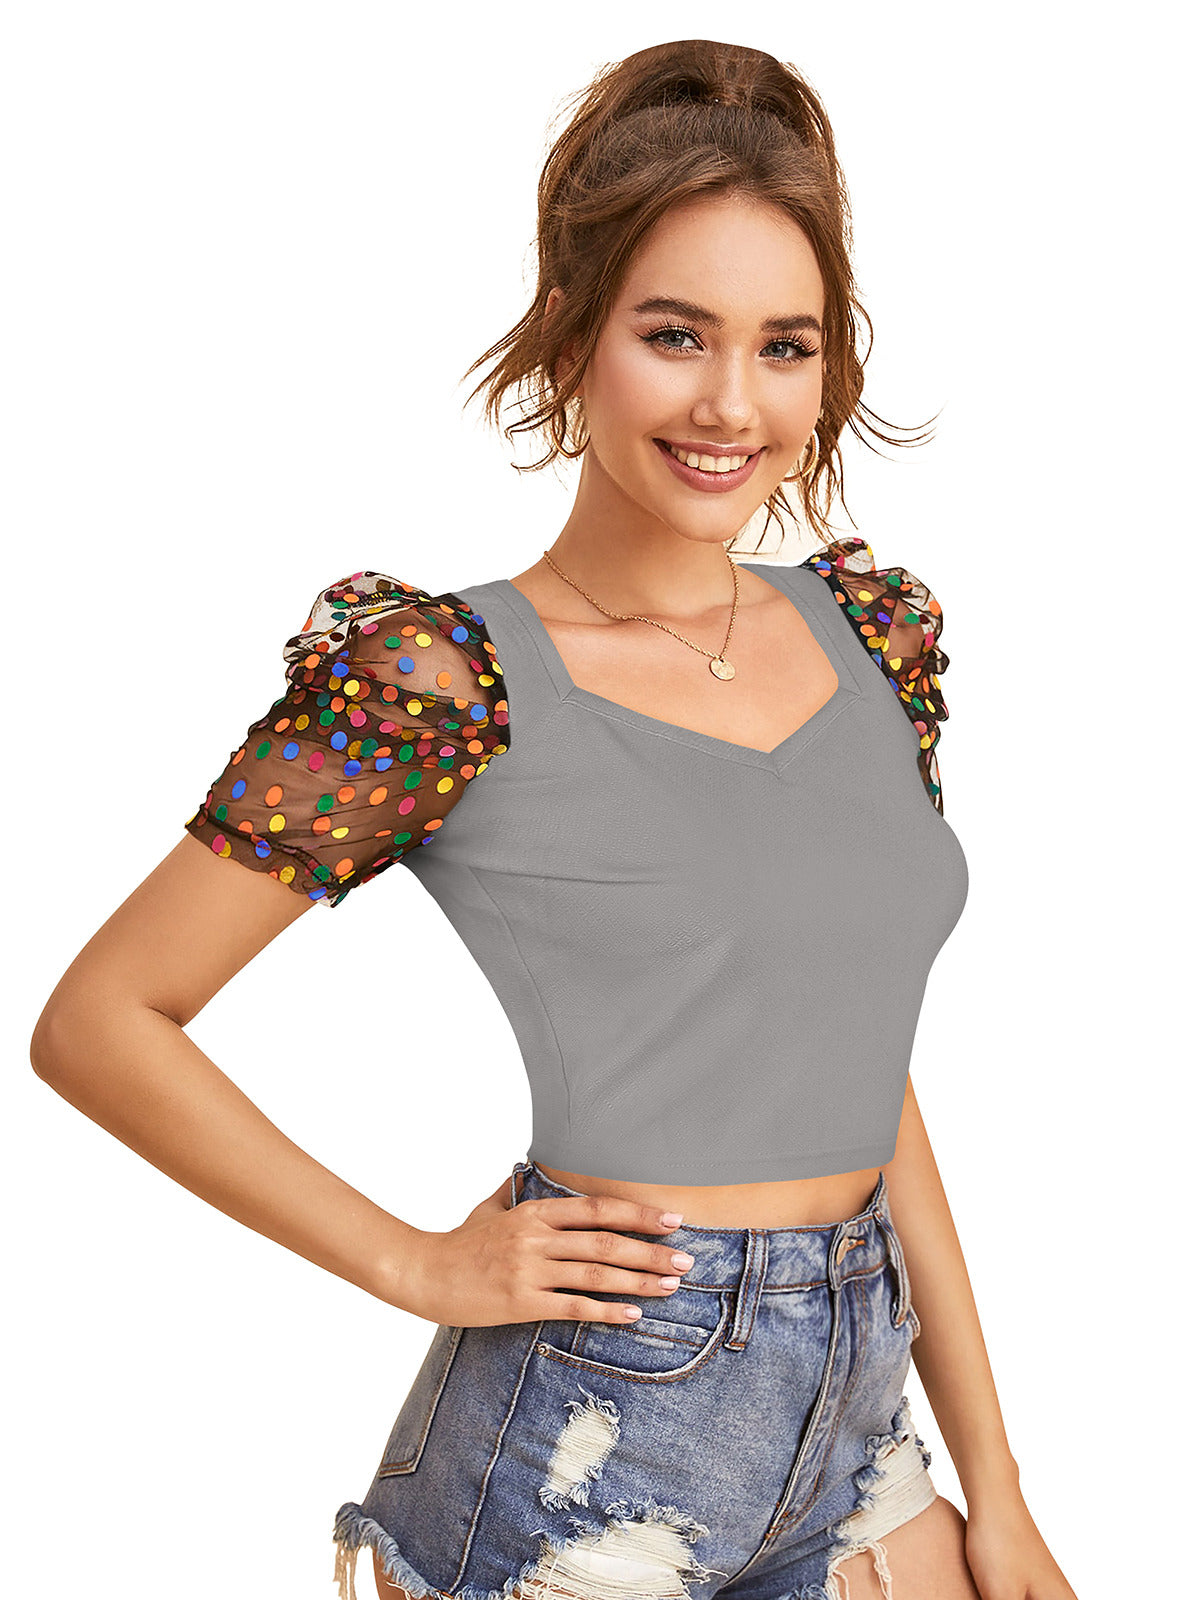 Odette Grey Knit Fabric Top For Women